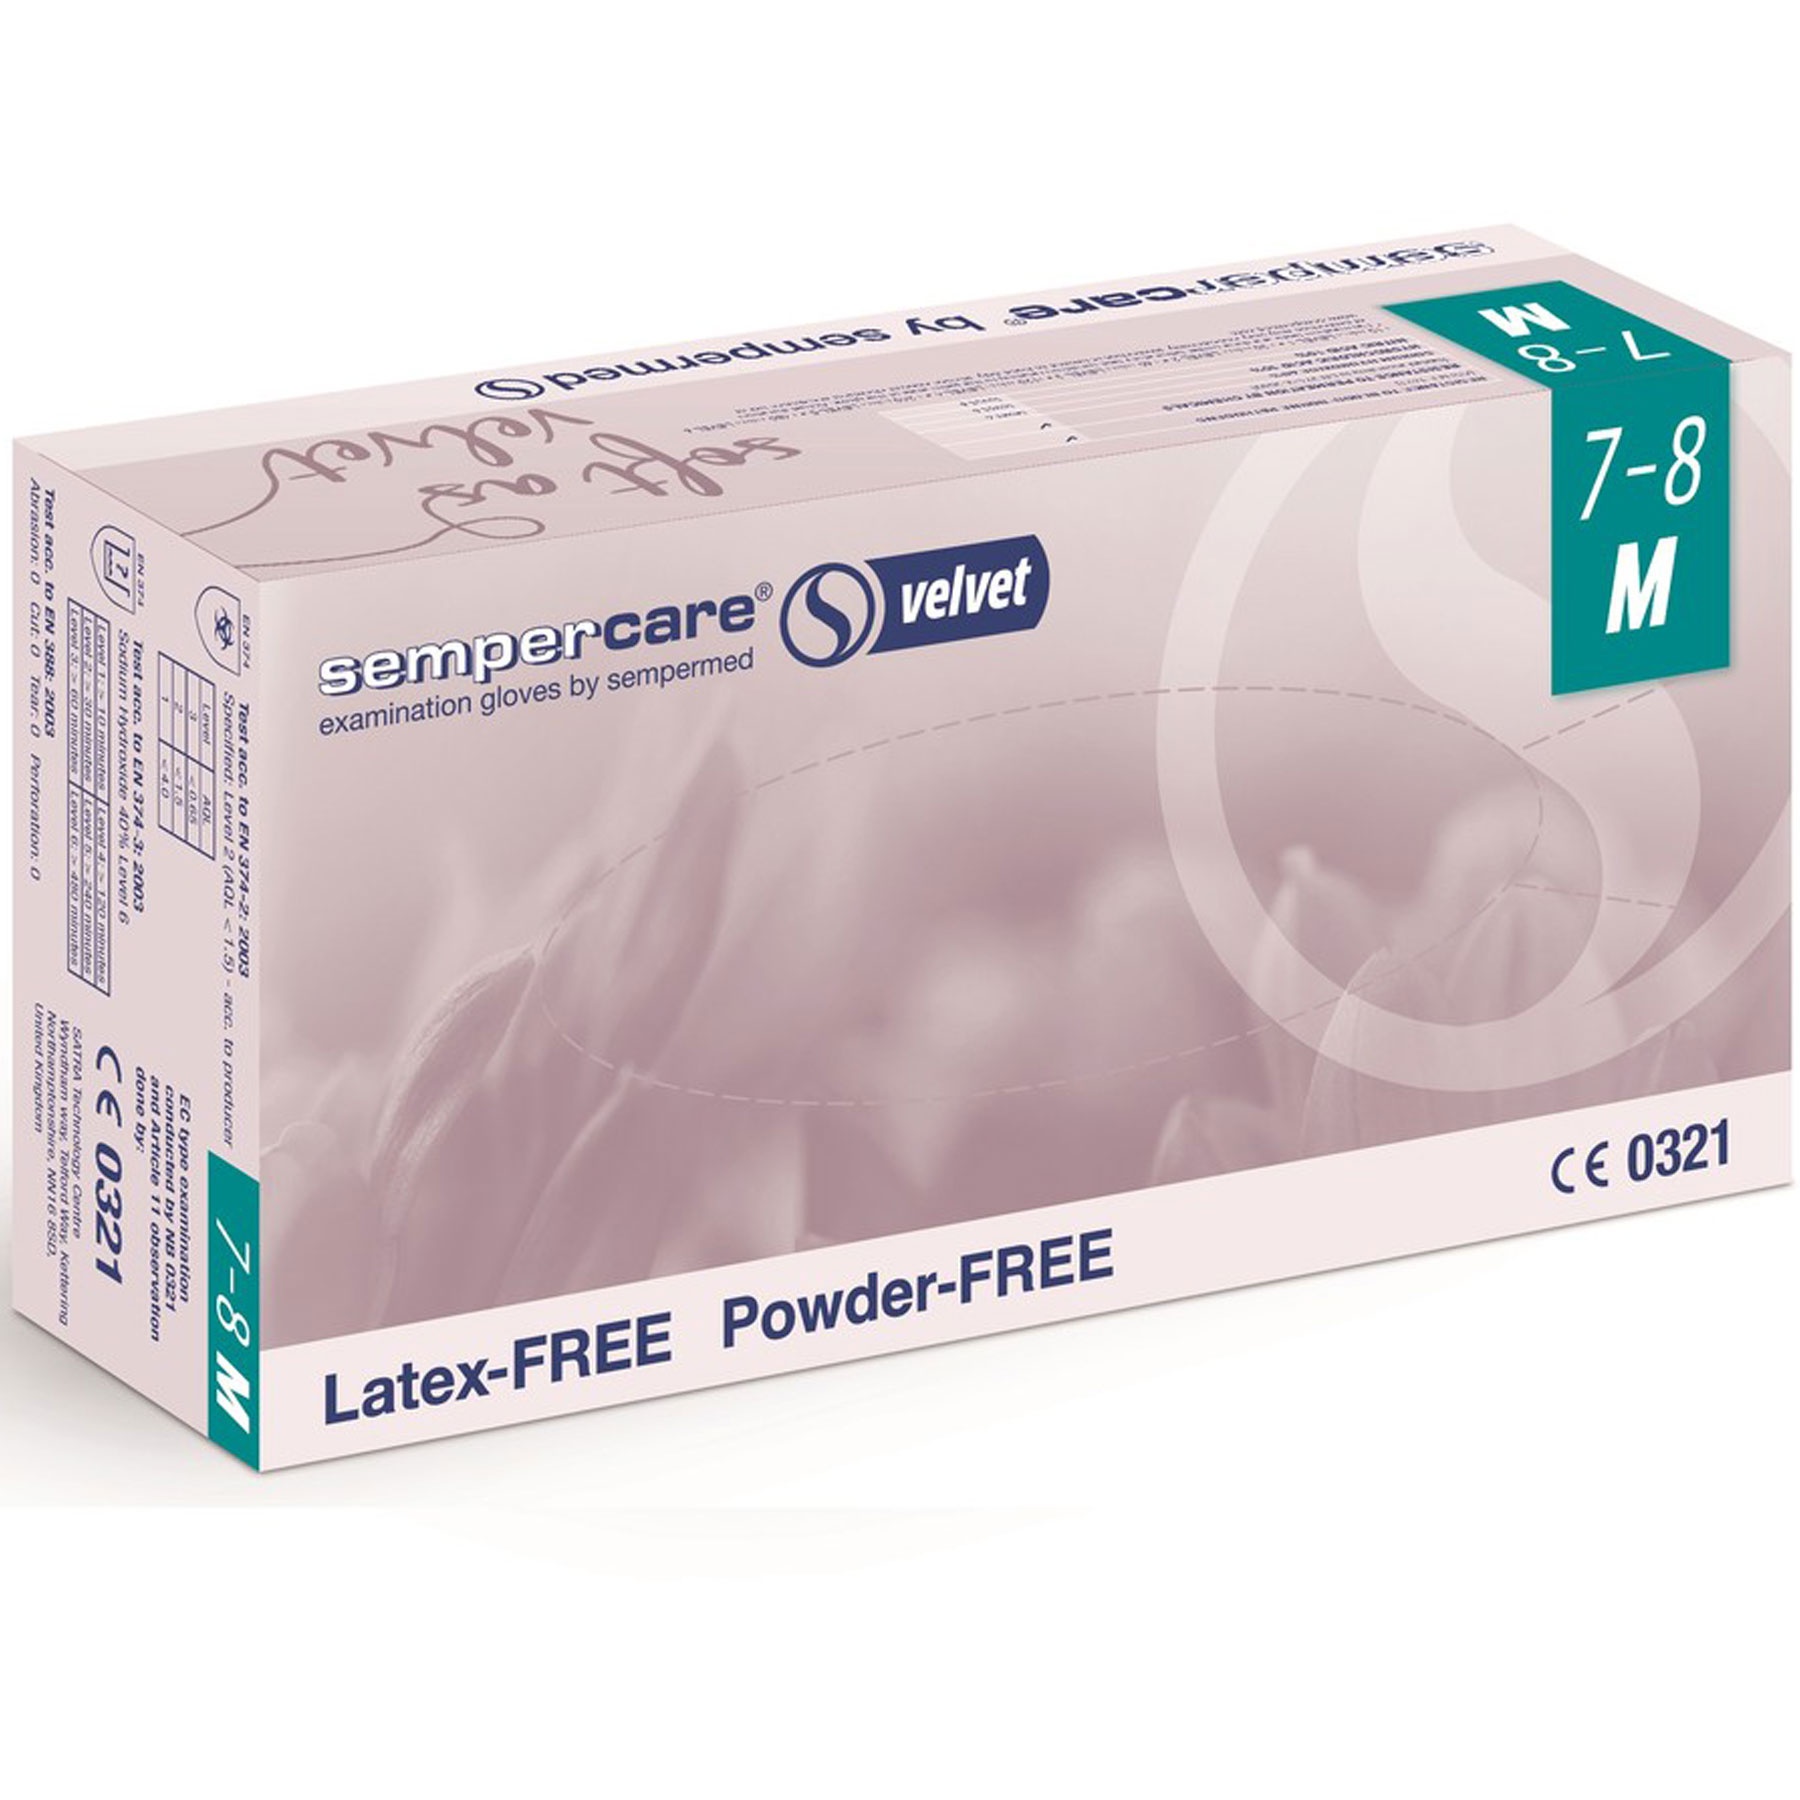 BOX OF 200 NITRILE DISPOSABLE GLOVES SEMPERCARE 